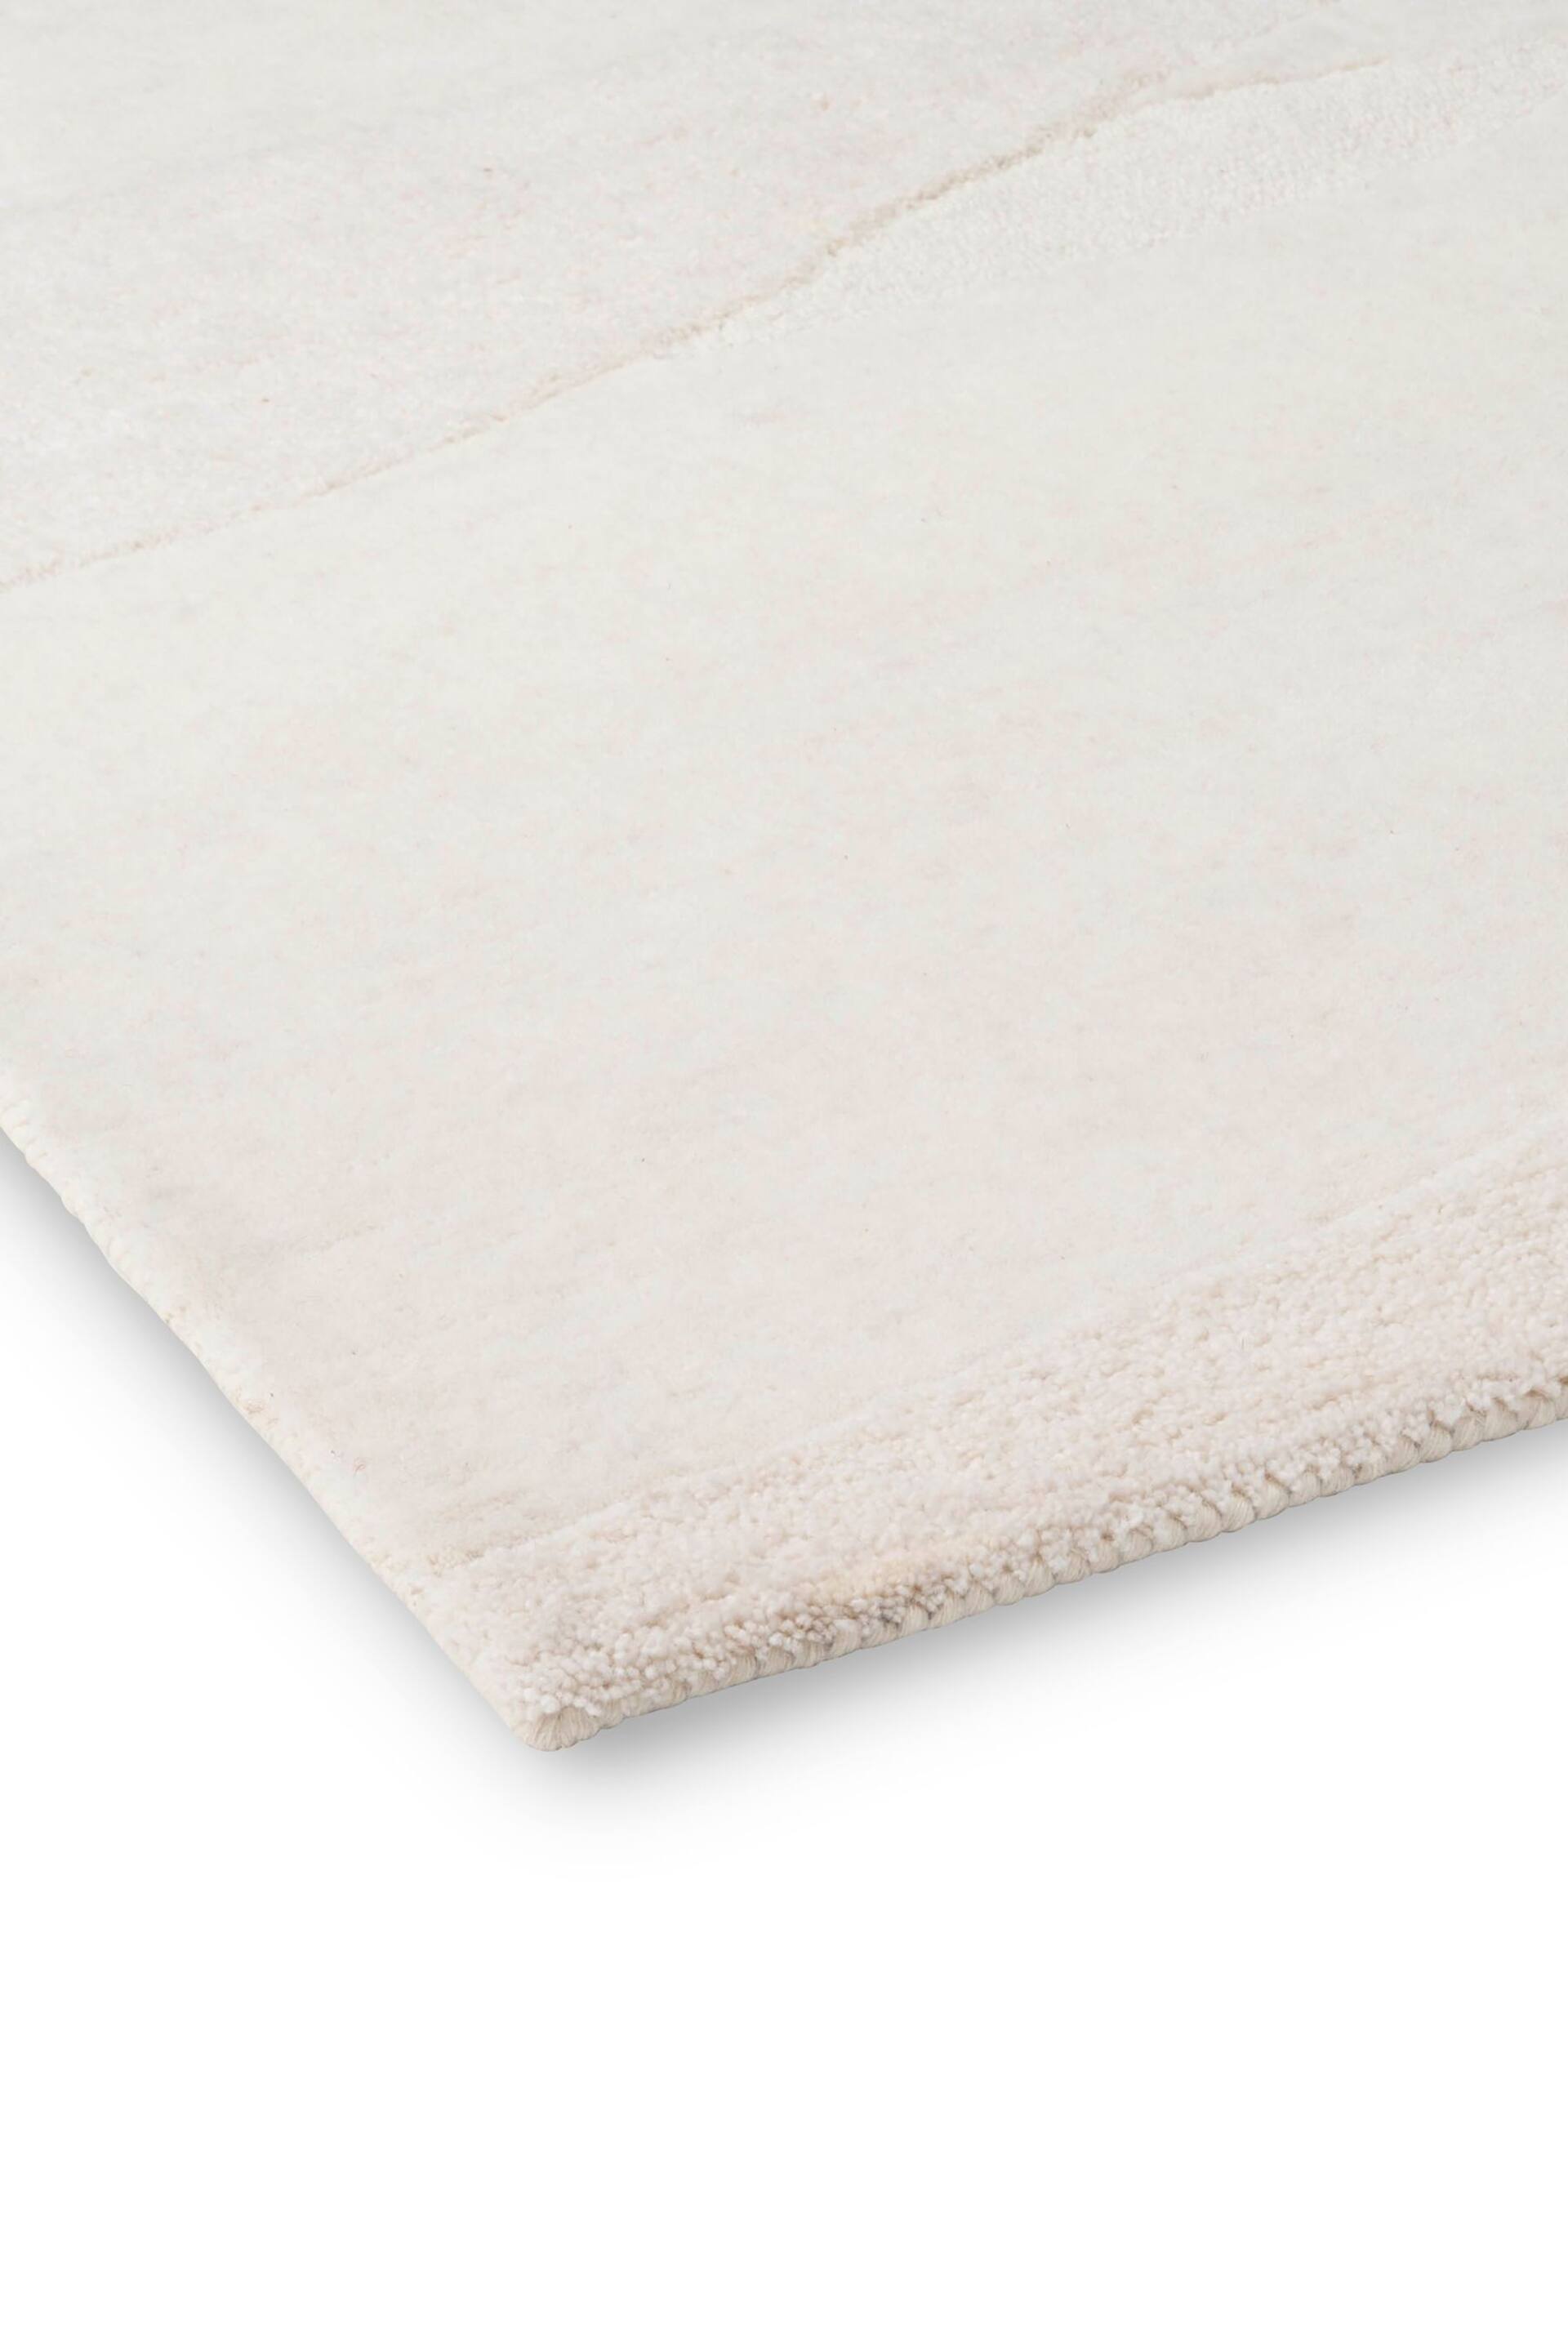 Brink & Campman White Decor Scape Rug - Image 4 of 4